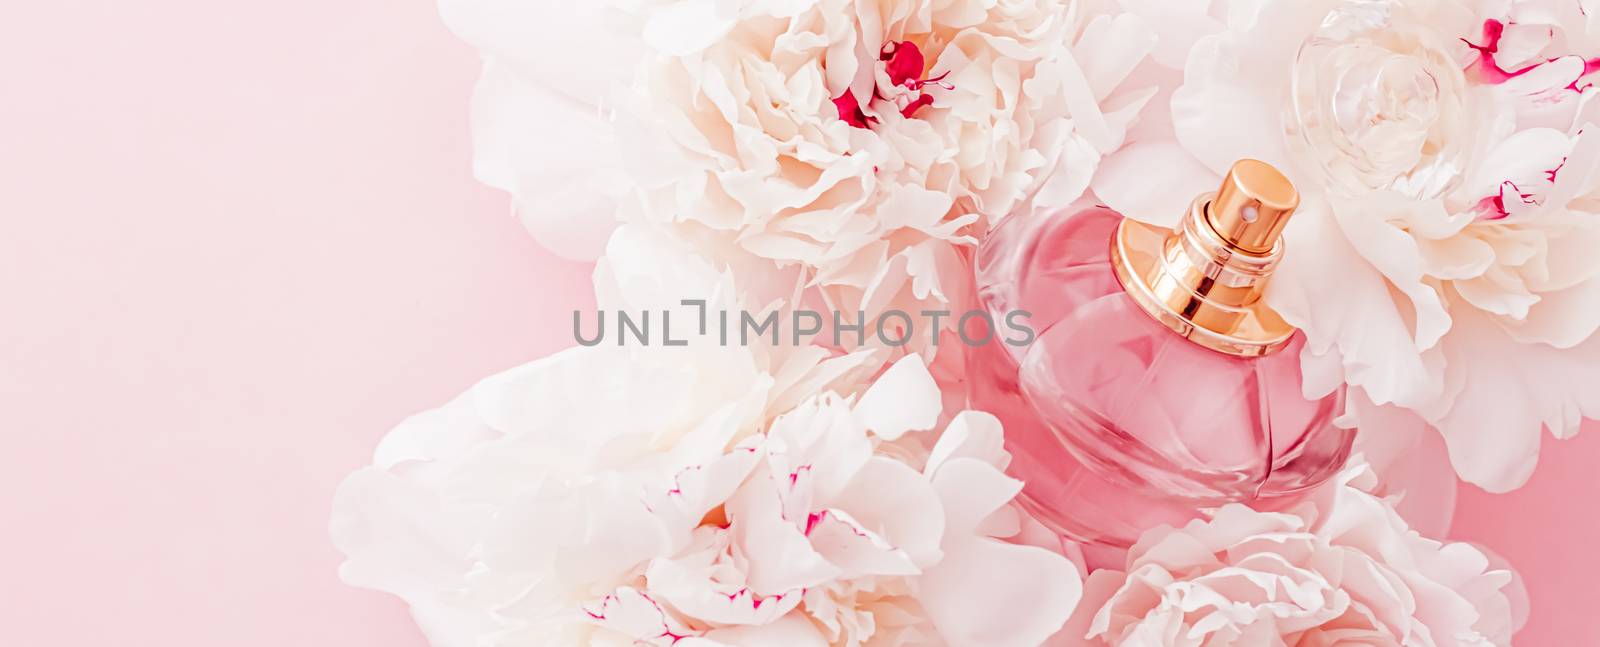 Luxe fragrance bottle as girly perfume product on background of peony flowers, parfum ad and beauty branding by Anneleven